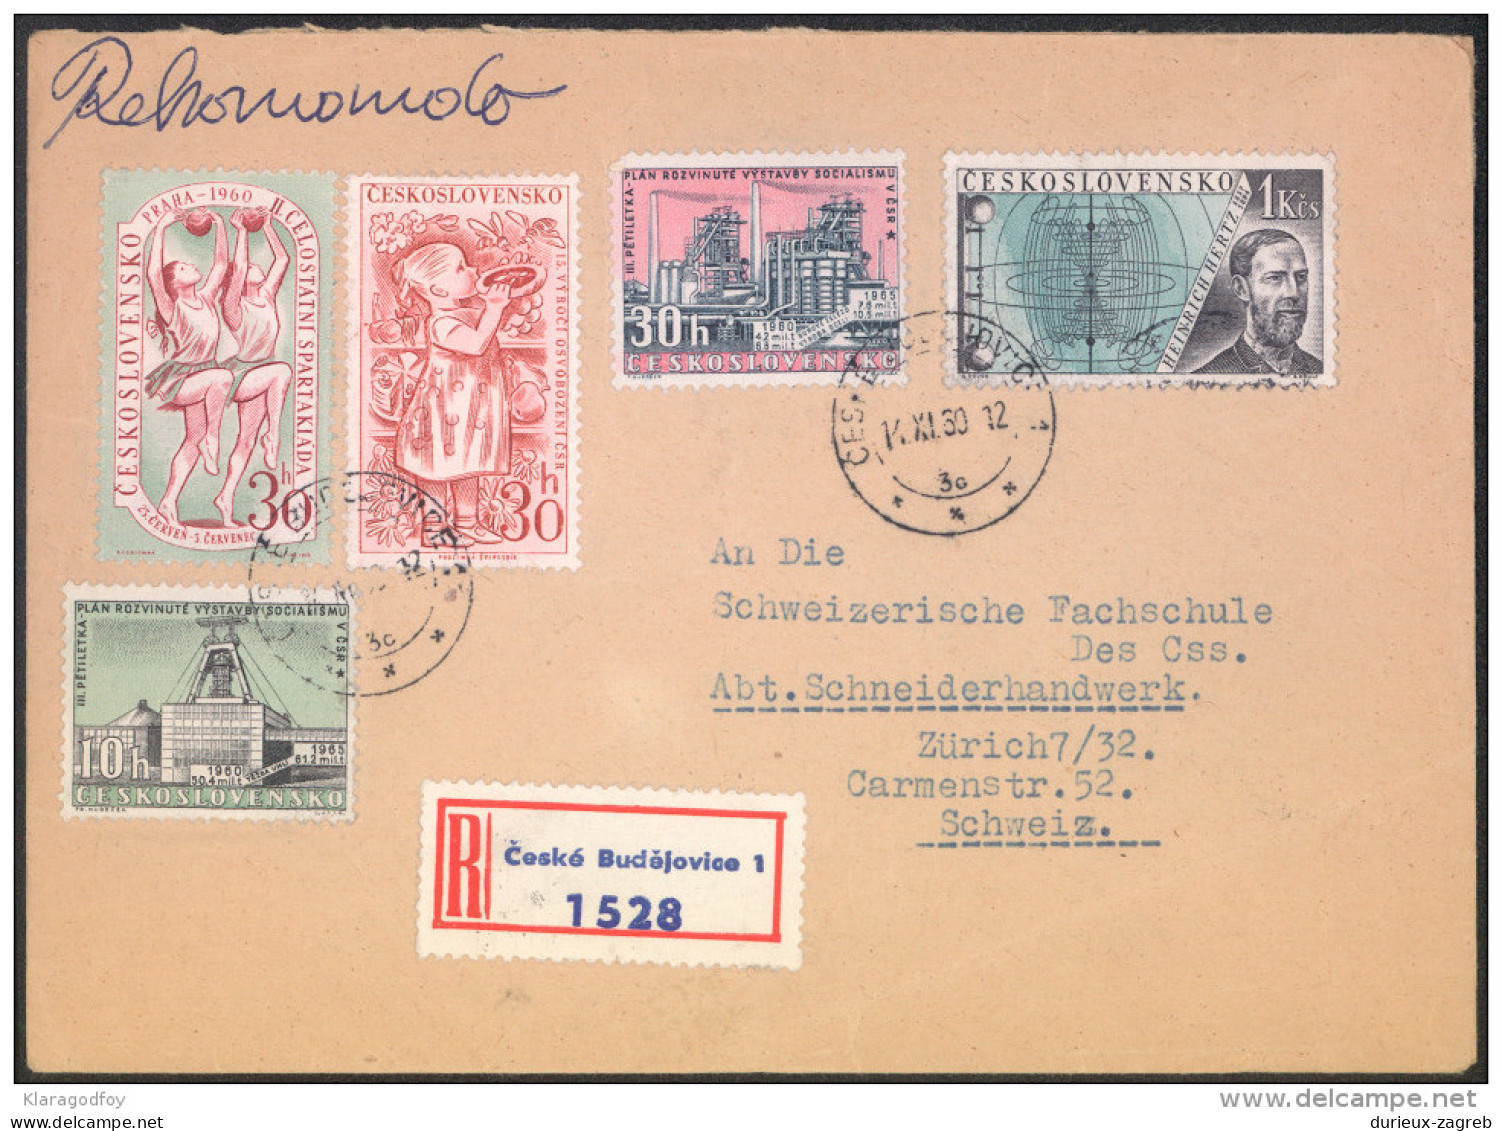 Czechoslovakia Registered Letter Cover Travelled Ceske Budejovice To Zurich 1960 Bb150921 - Covers & Documents